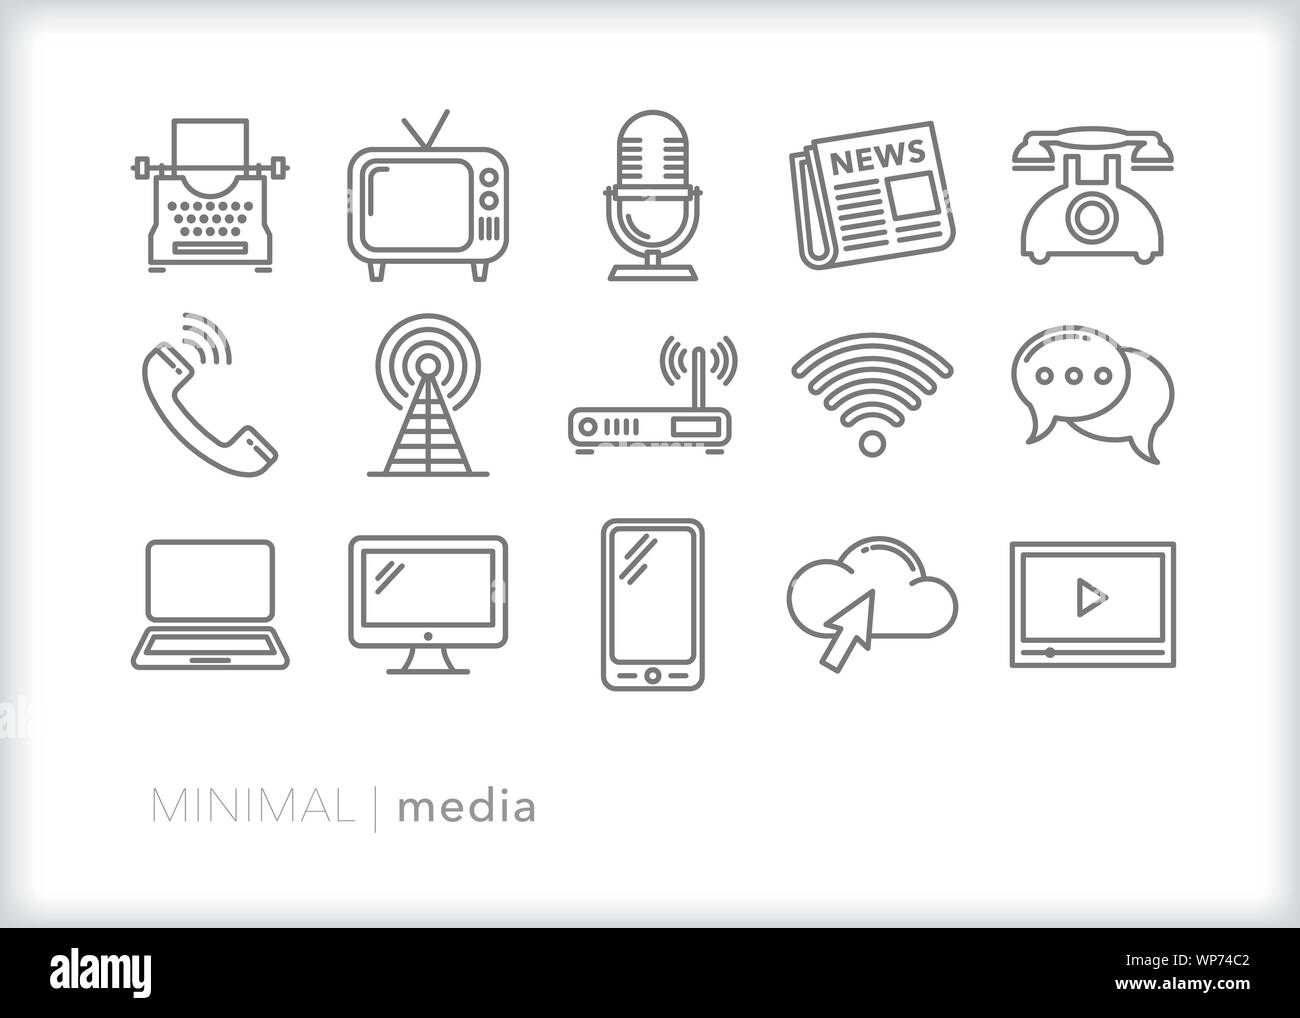 Set of 15 media line icons of technology and forms of communication, information and news Stock Vector